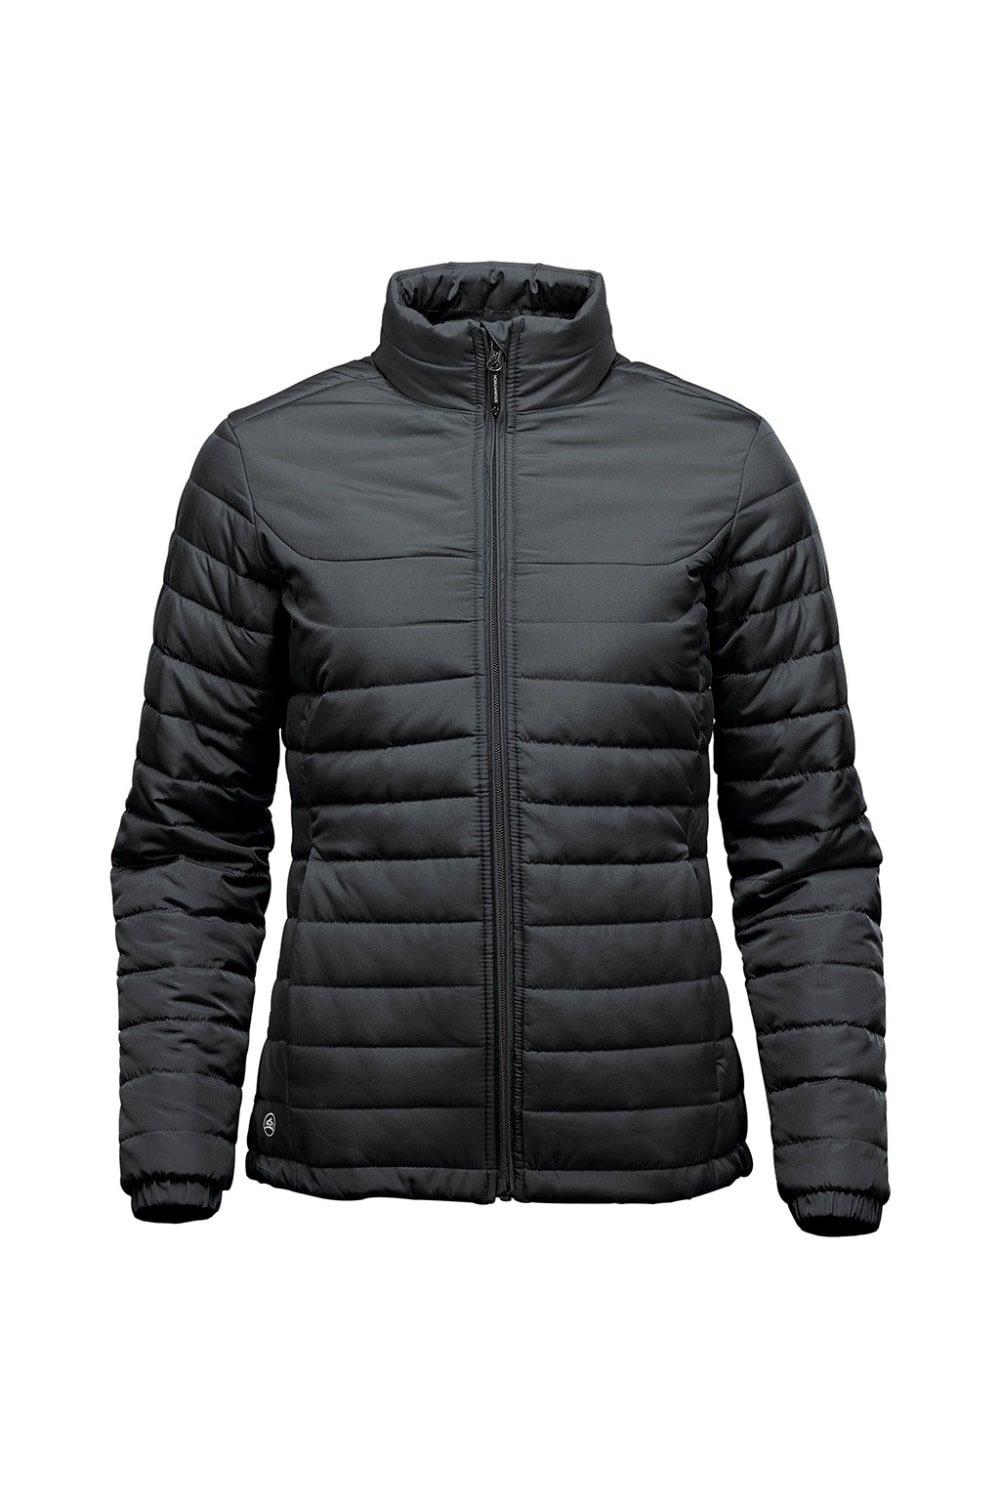 Stormtech Women's Nautilus Quilted Padded Jacket|Size: M|black